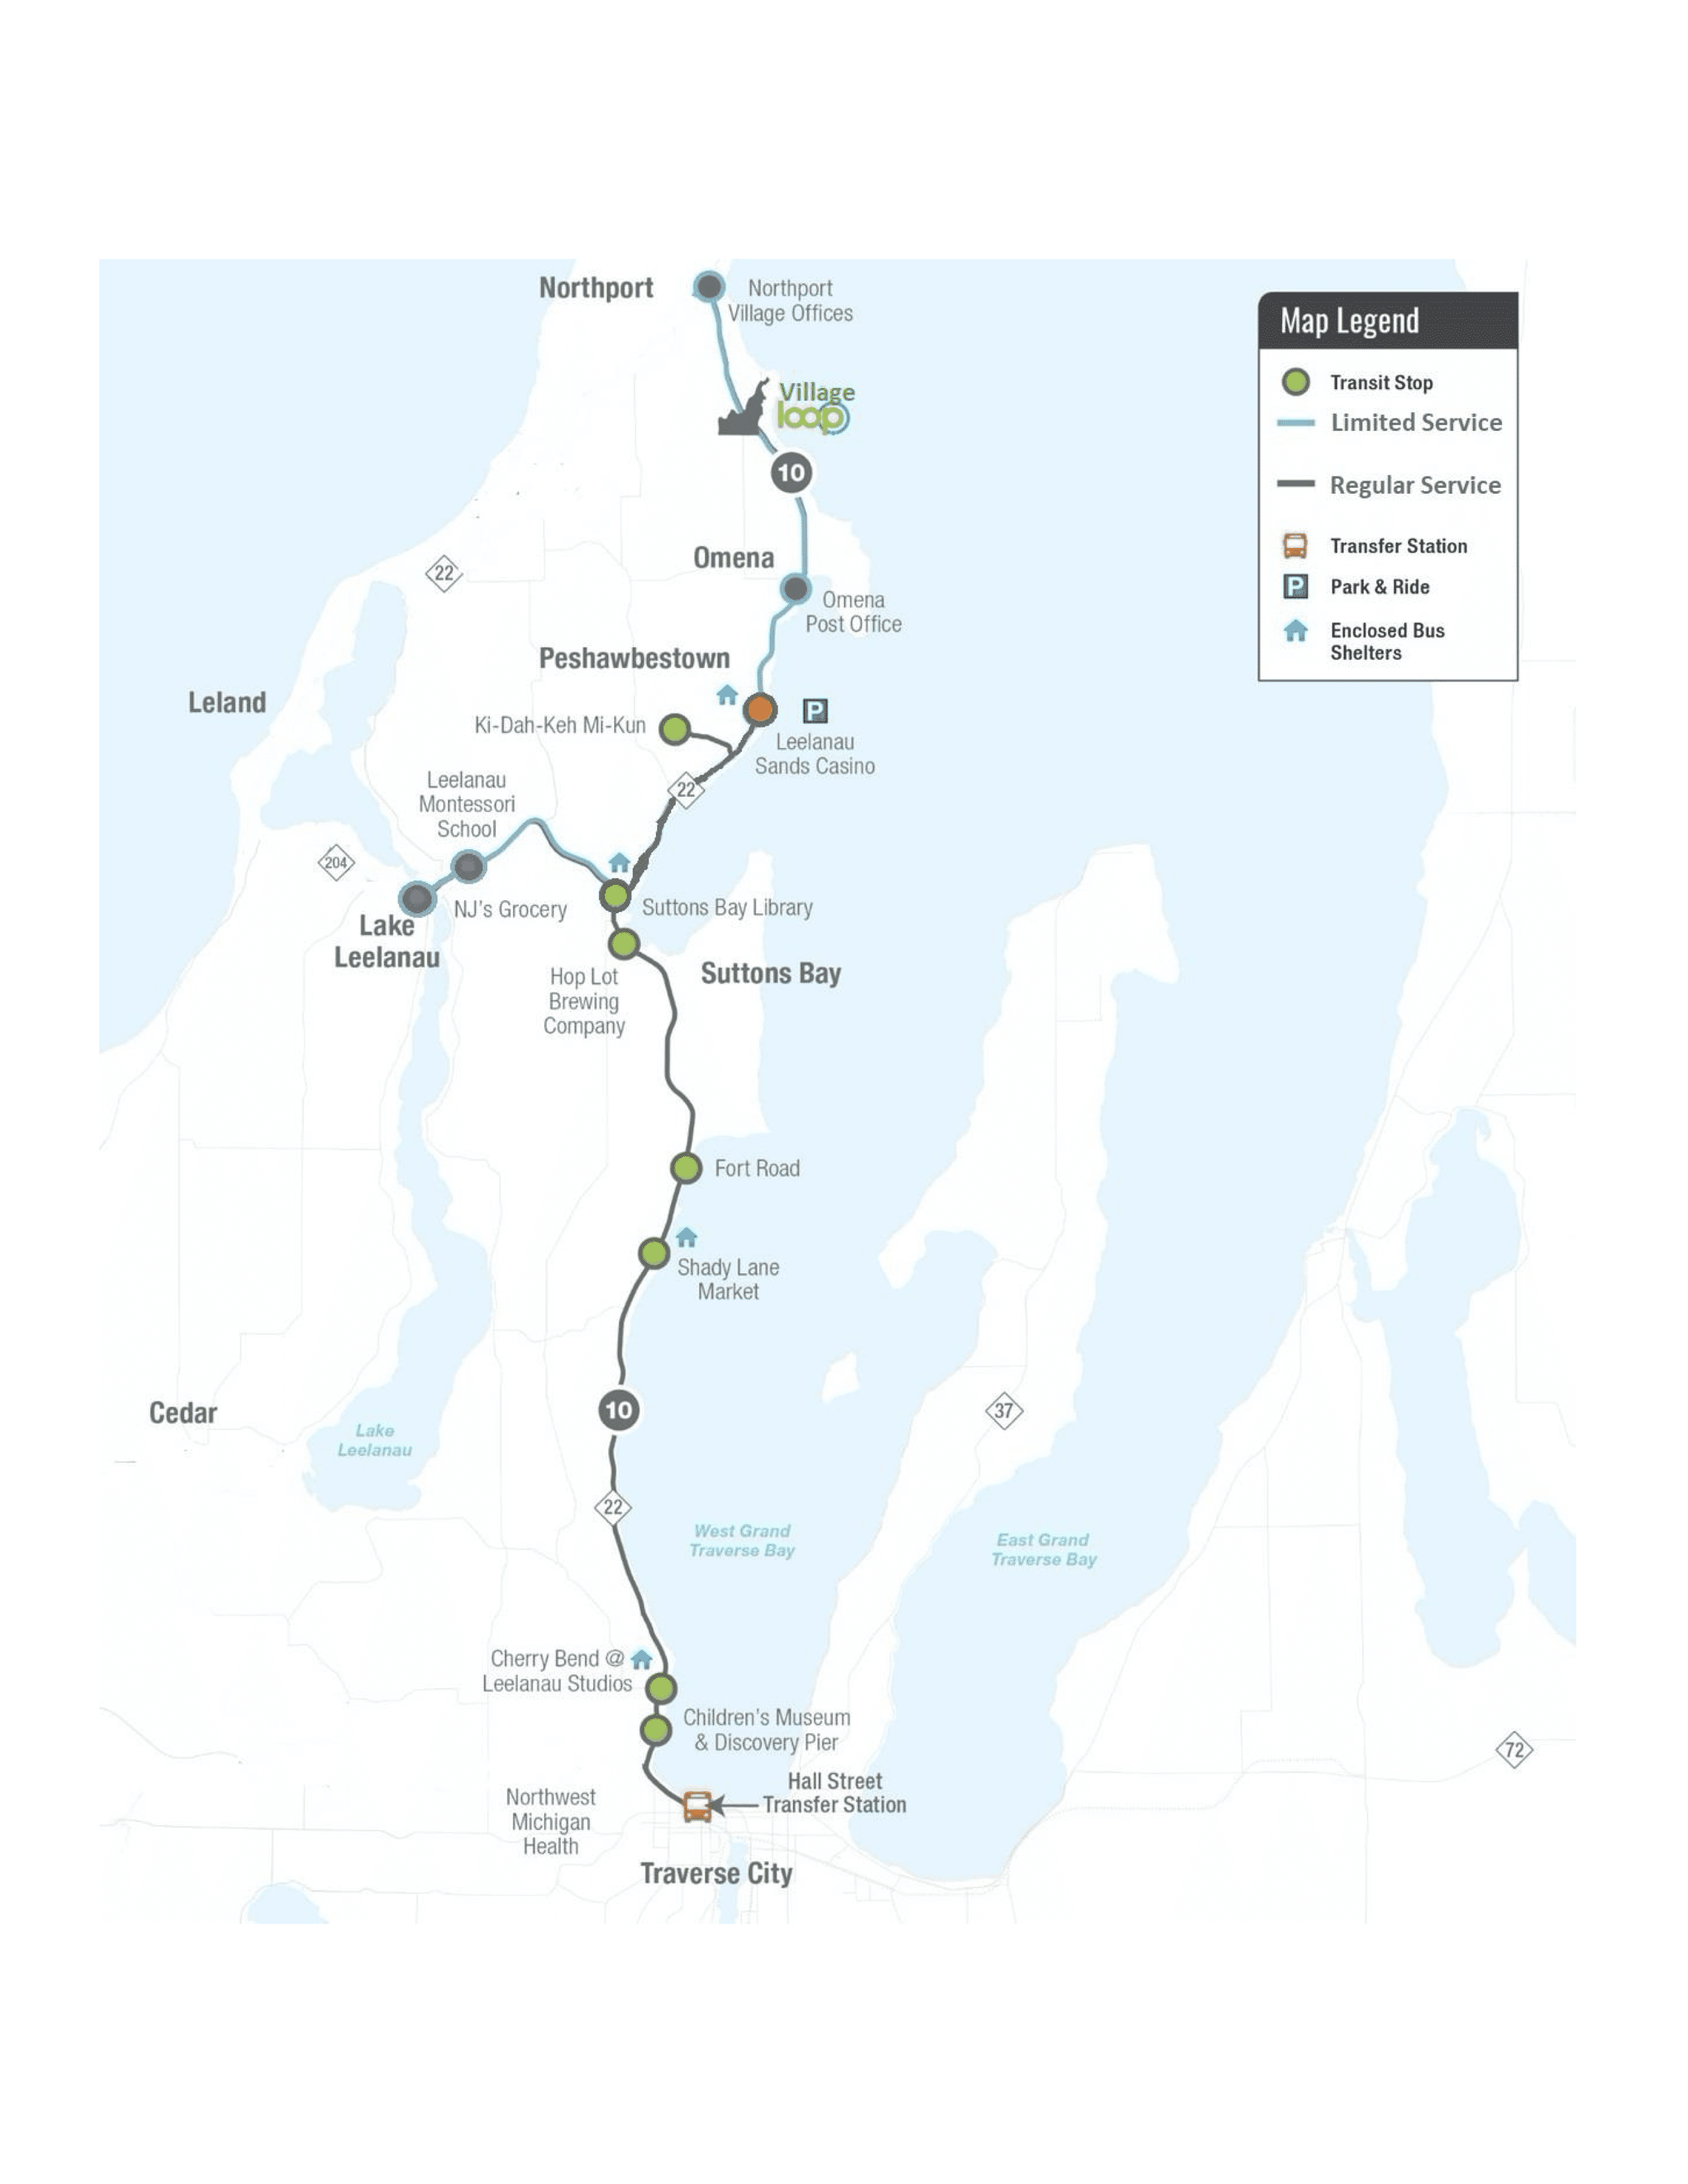 BATA Route 10 Bus Route Map for DIY Bike-n-Ride Trip in Traverse City